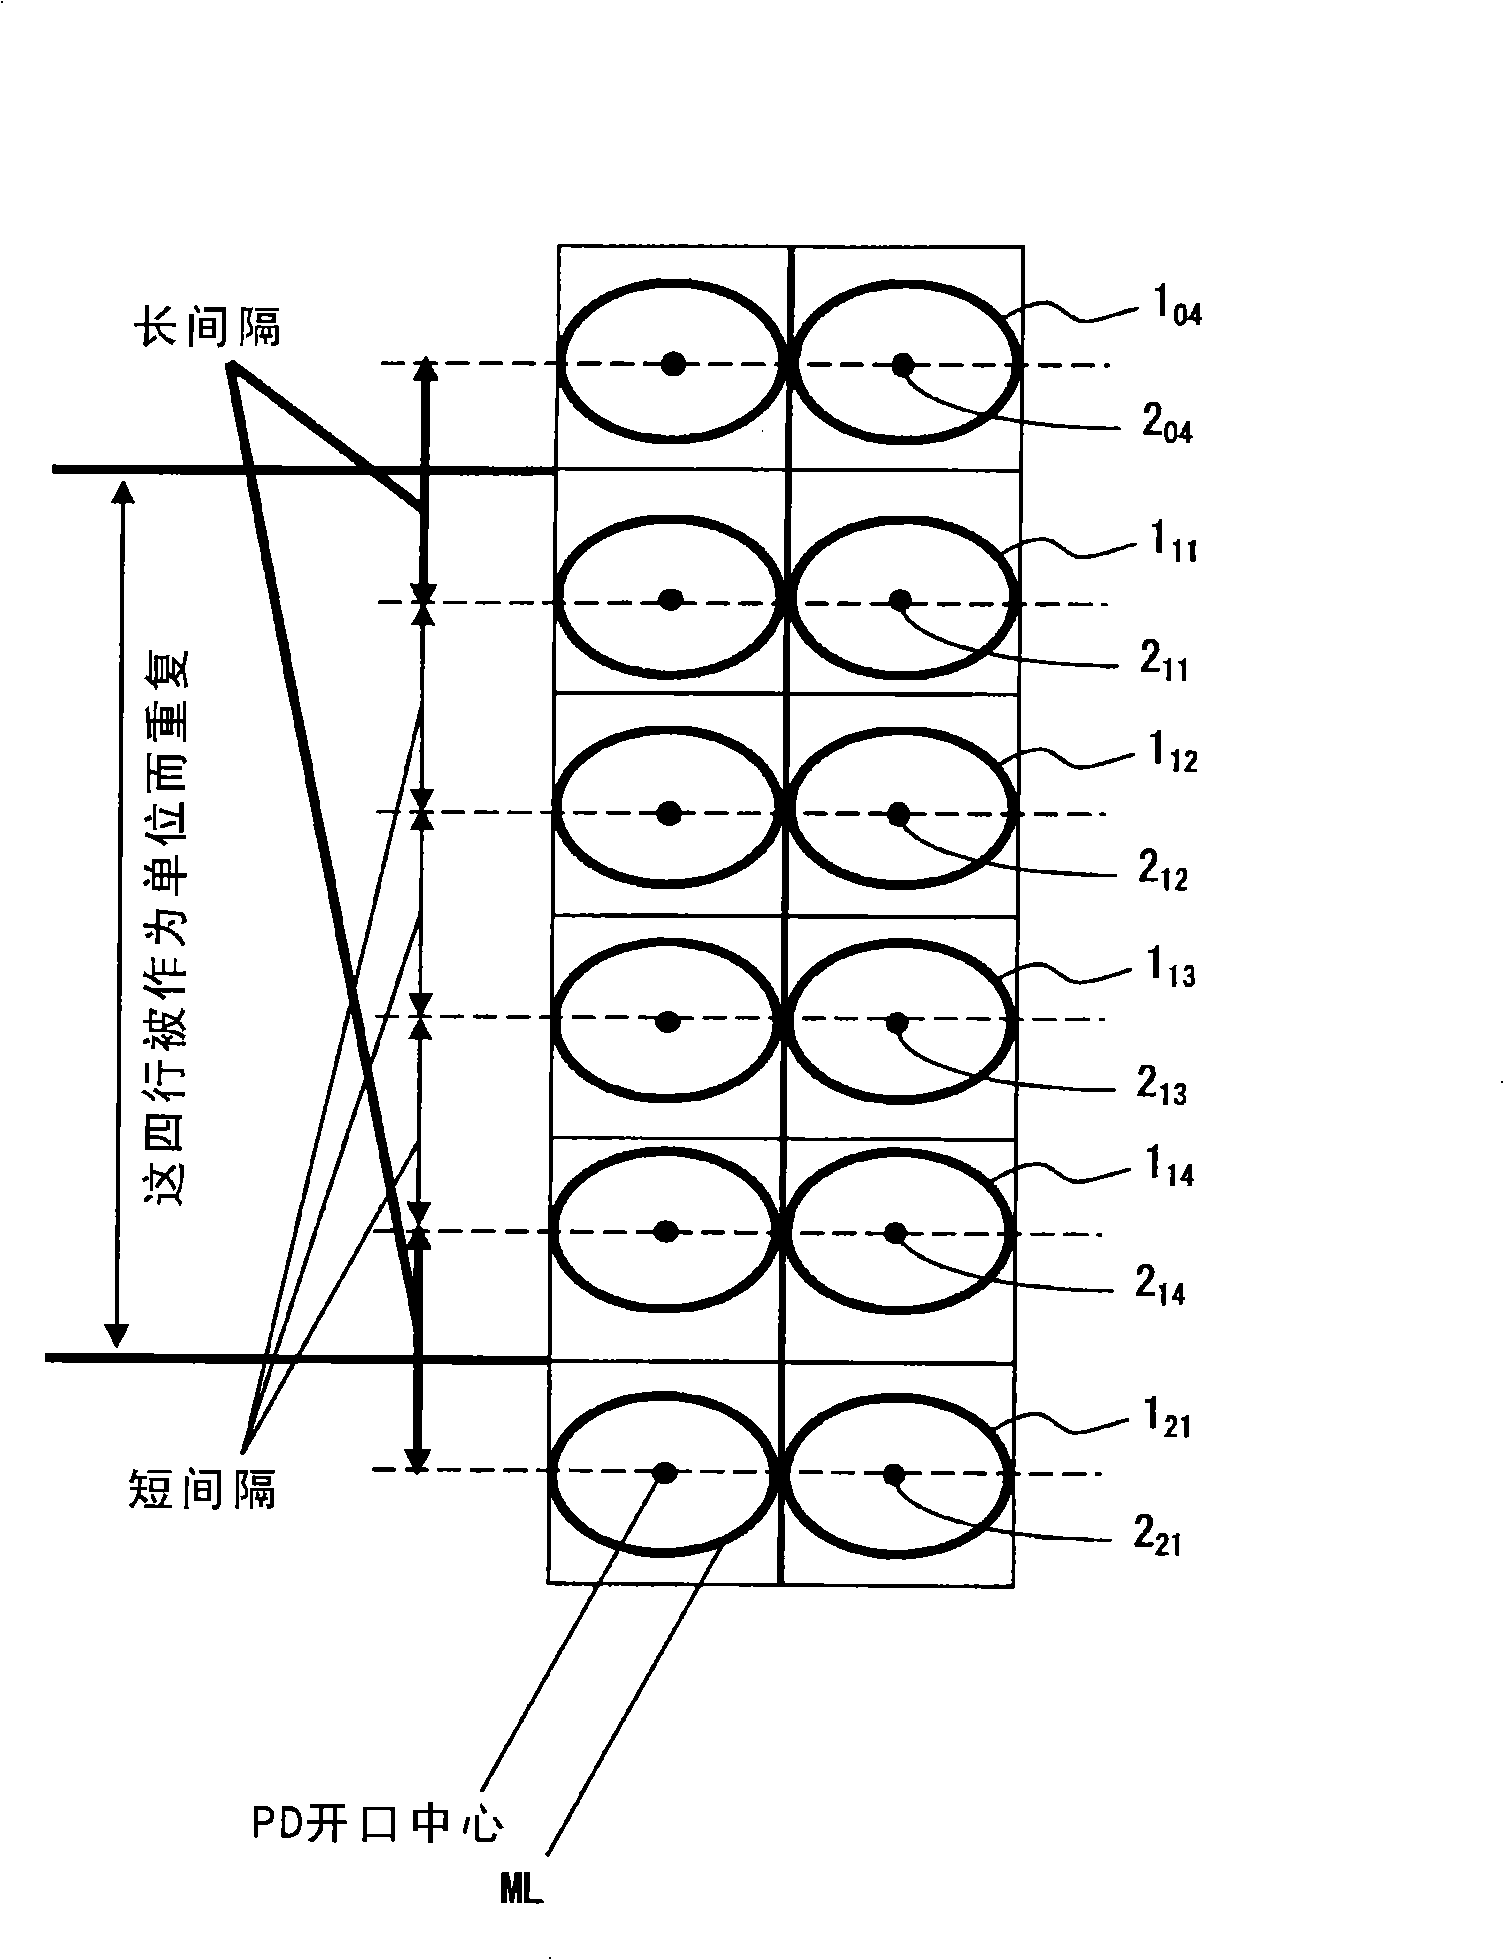 Solid state image sensing device